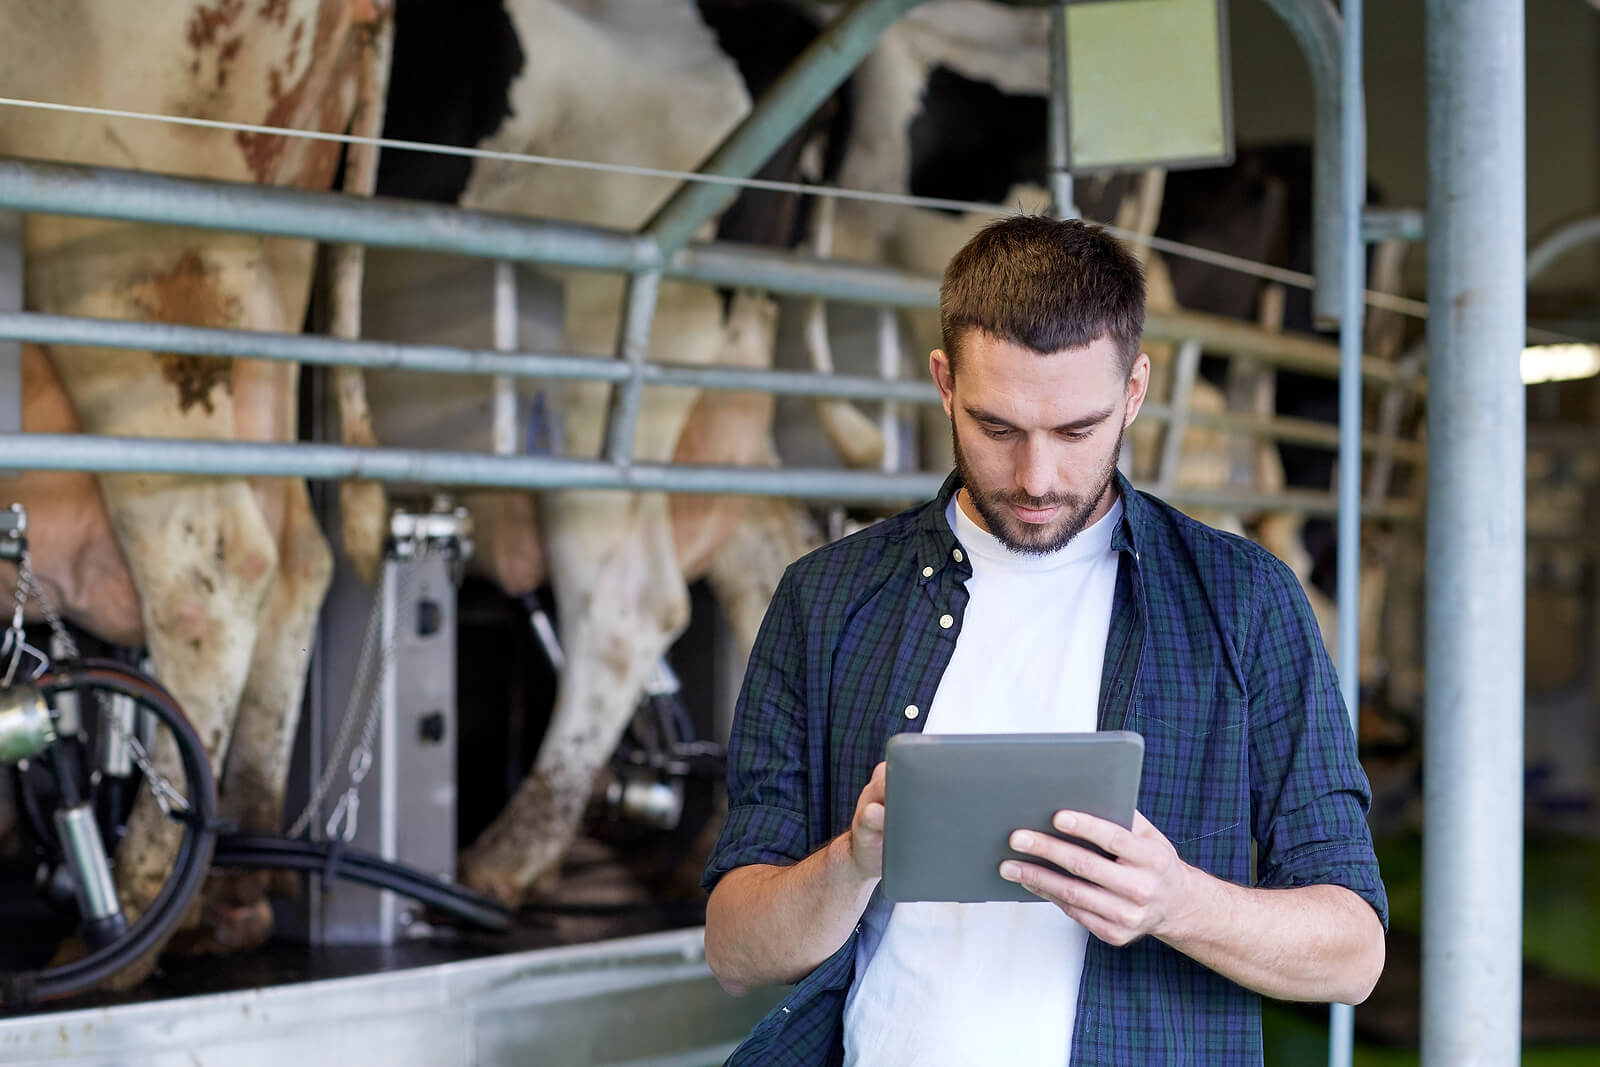 agriculture industry, farming, people, technology and animal husbandry concept - young man or farmer with tablet pc computer and cows at rotary parlour system on dairy farm